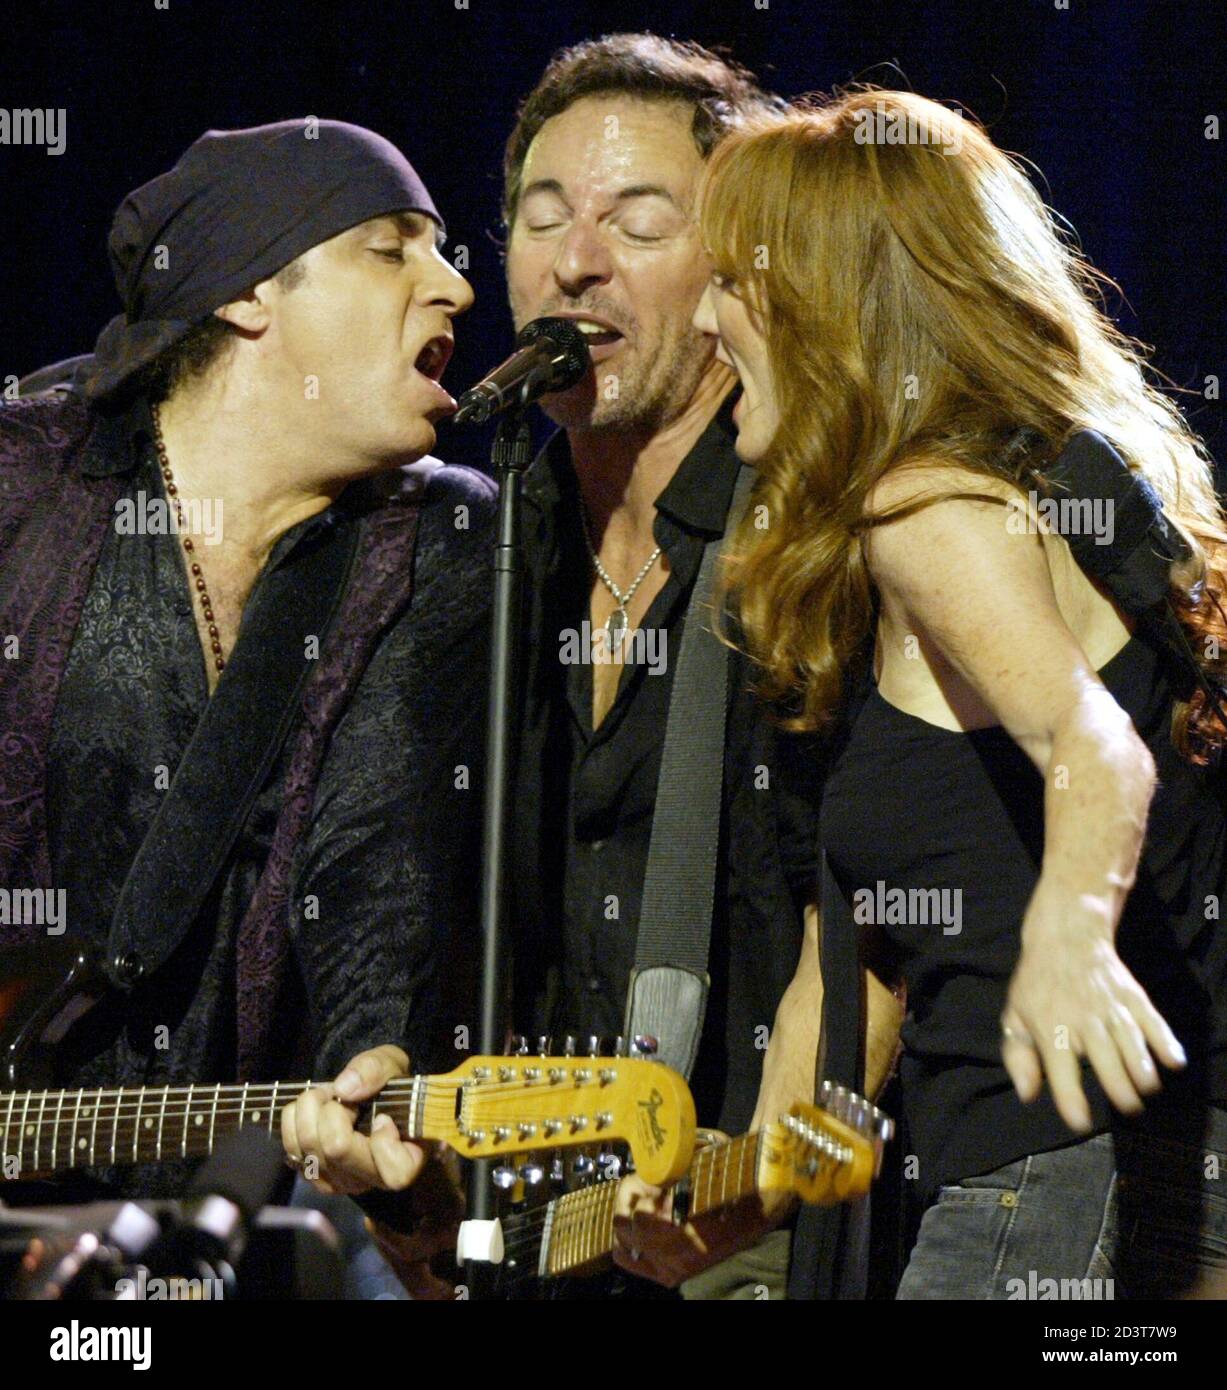 Rock and roll musician Bruce Springsteen sings with E Street Band members  Steve Van Zandt (L) and Patty Scialfa at the Convention Center in Asbury  Park, New Jersey on July 30, 2002